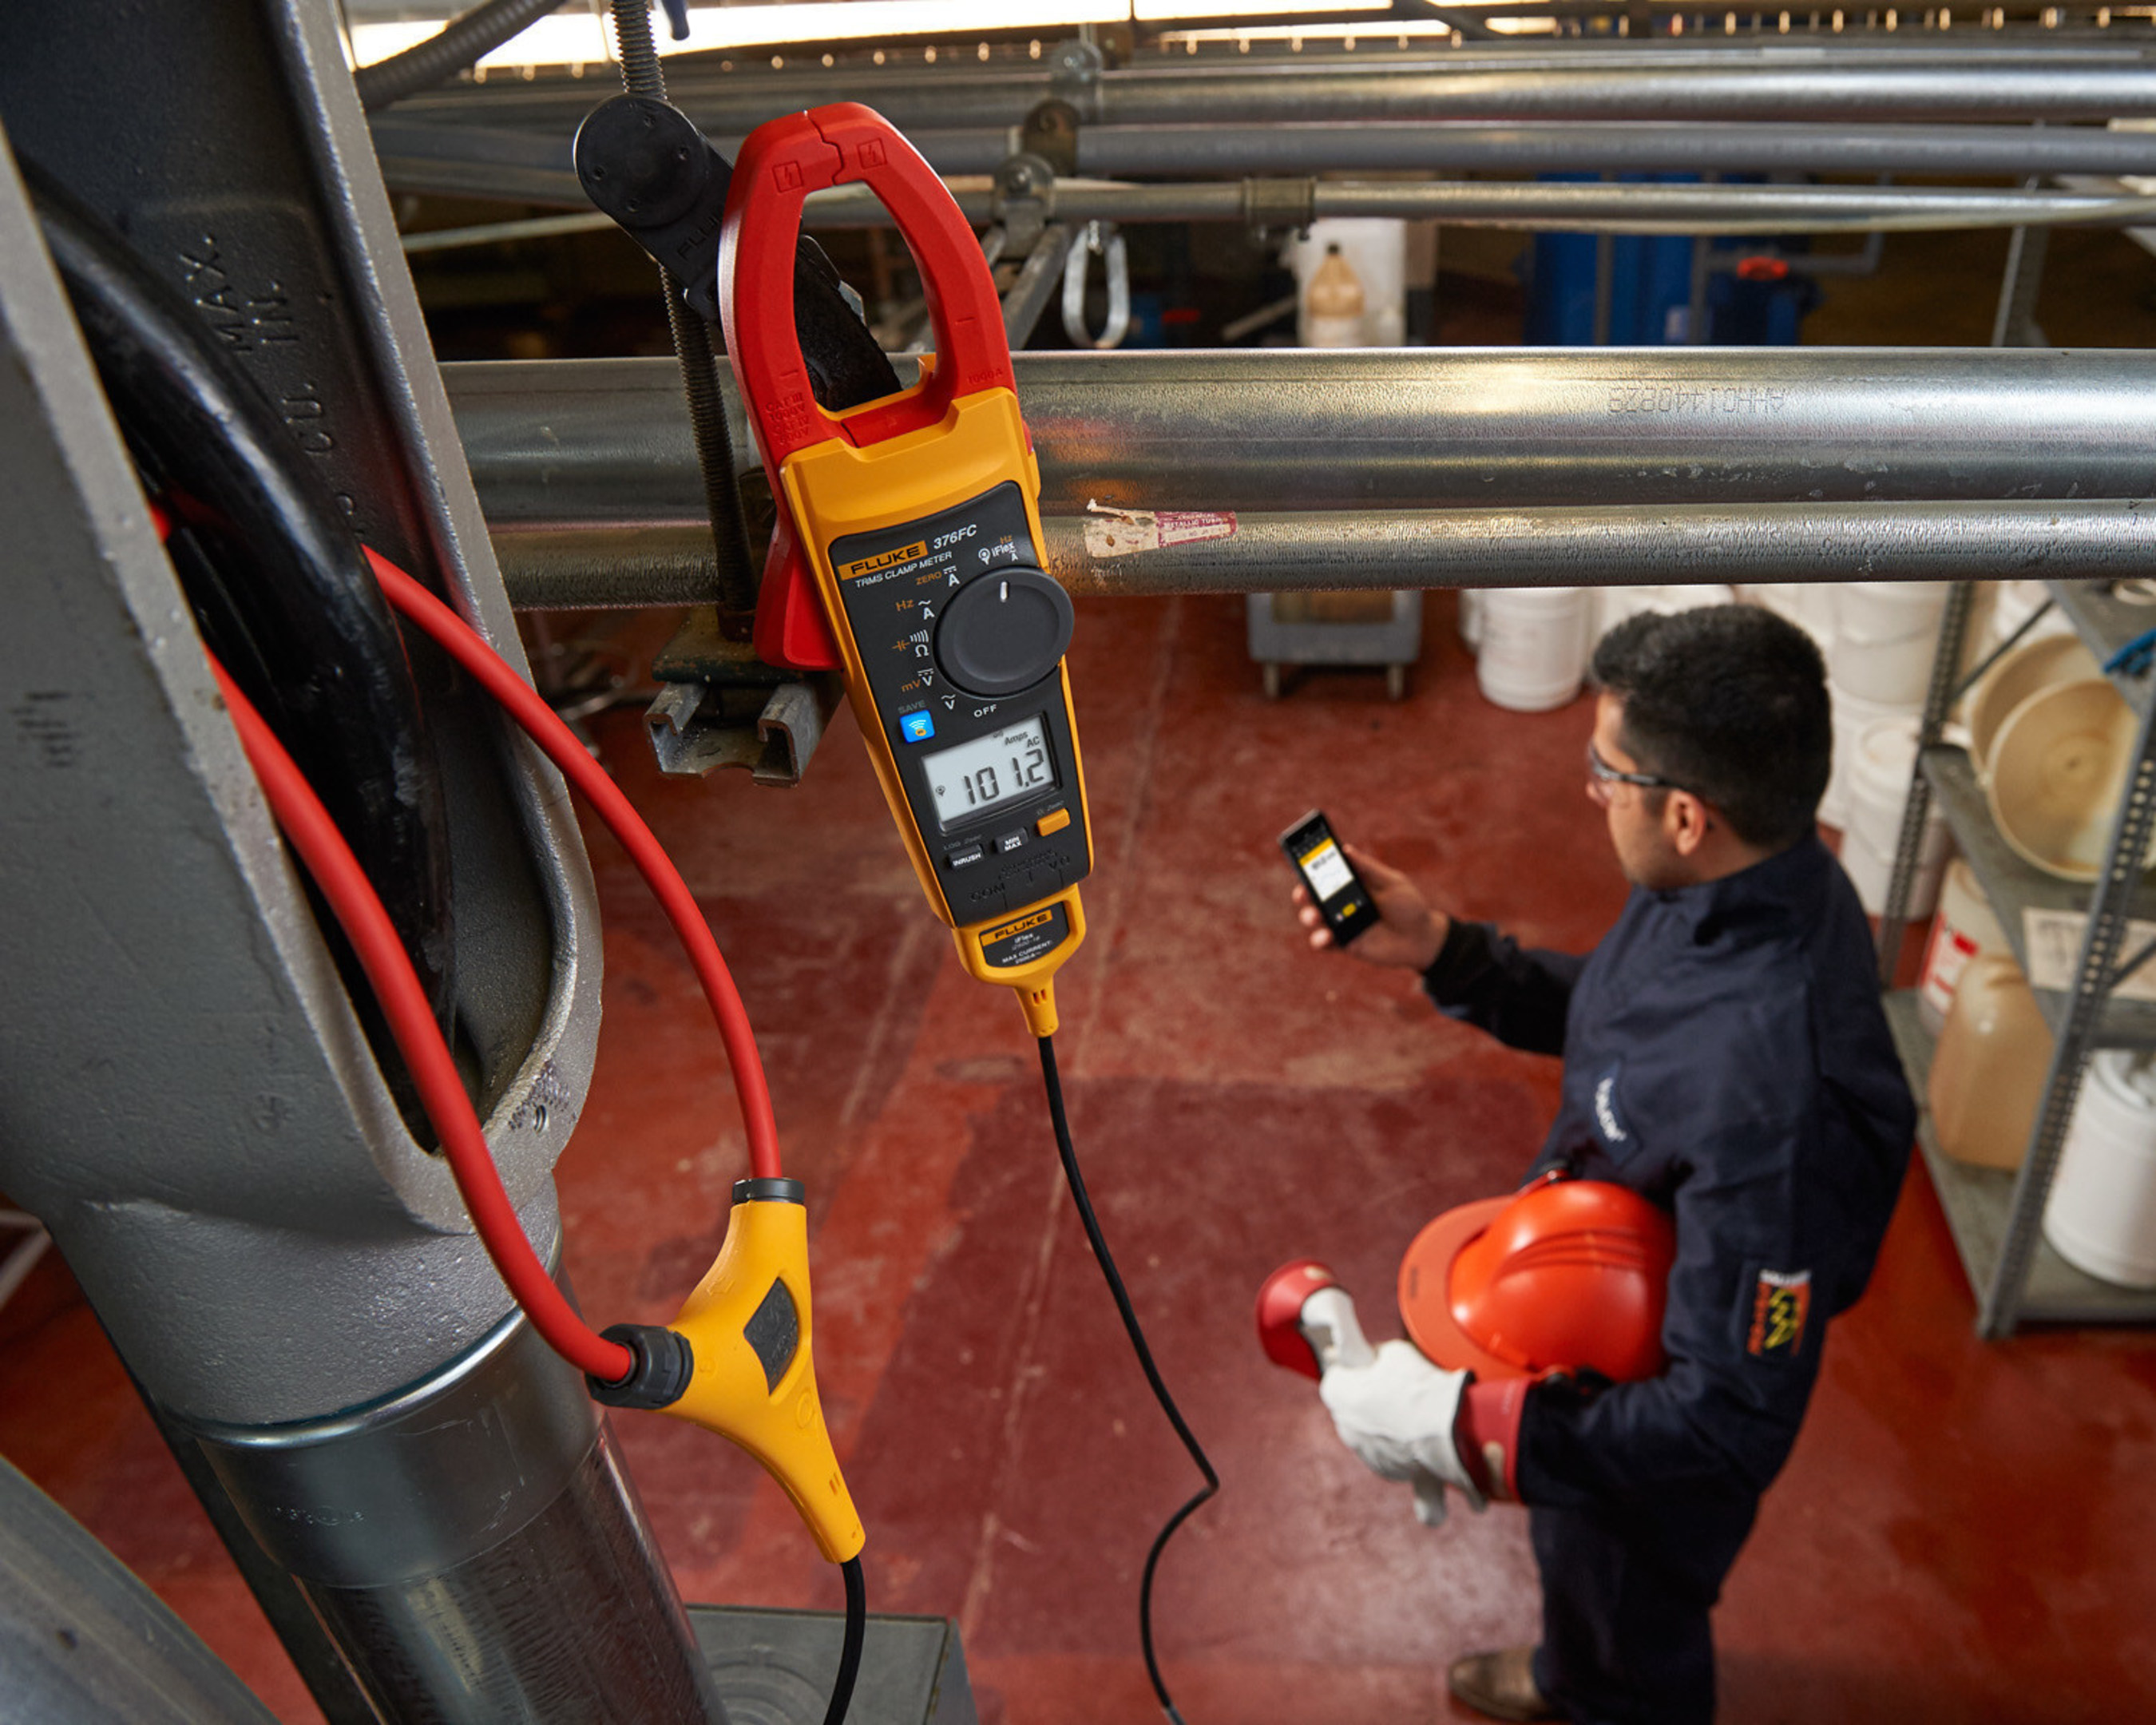 The new Fluke Connect-enabled 370 FC Series Clamp Meters log measurements to pinpoint intermittent faults precisely without the need for the technician to be present. Those measurements are then wirelessly transmitted to the Fluke Connect app on smartphones or tablets and automatically uploaded to the cloud, keeping technicians outside the arc flash zone and away from dangerous moving machinery, improving safety.